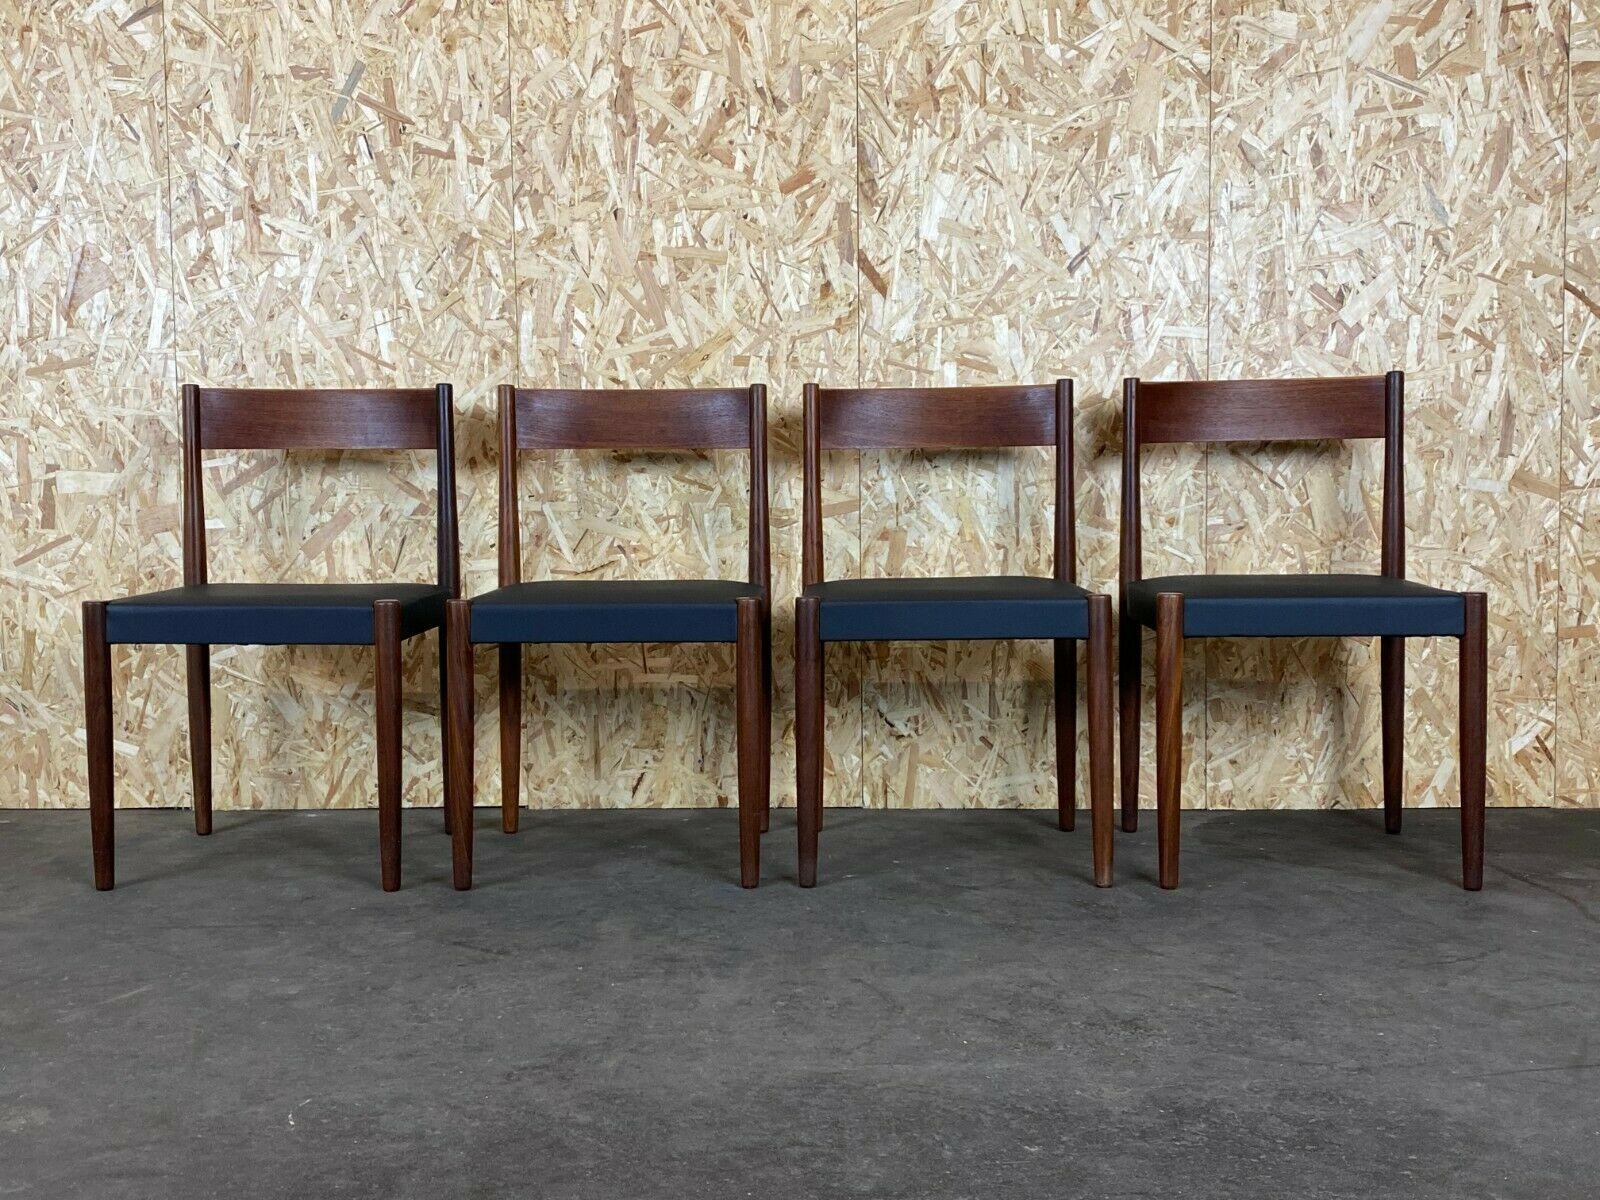 4x 60s 70s teak chairs dining chair Poul M. Volther Frem Røjle

Object: 4x chair

Manufacturer: Frem Rojle

Condition: good

Age: around 1960-1970

Dimensions:

47.5cm x 48.5cm x 78.5cm
Seat height = 43.5cm

Other notes:

The